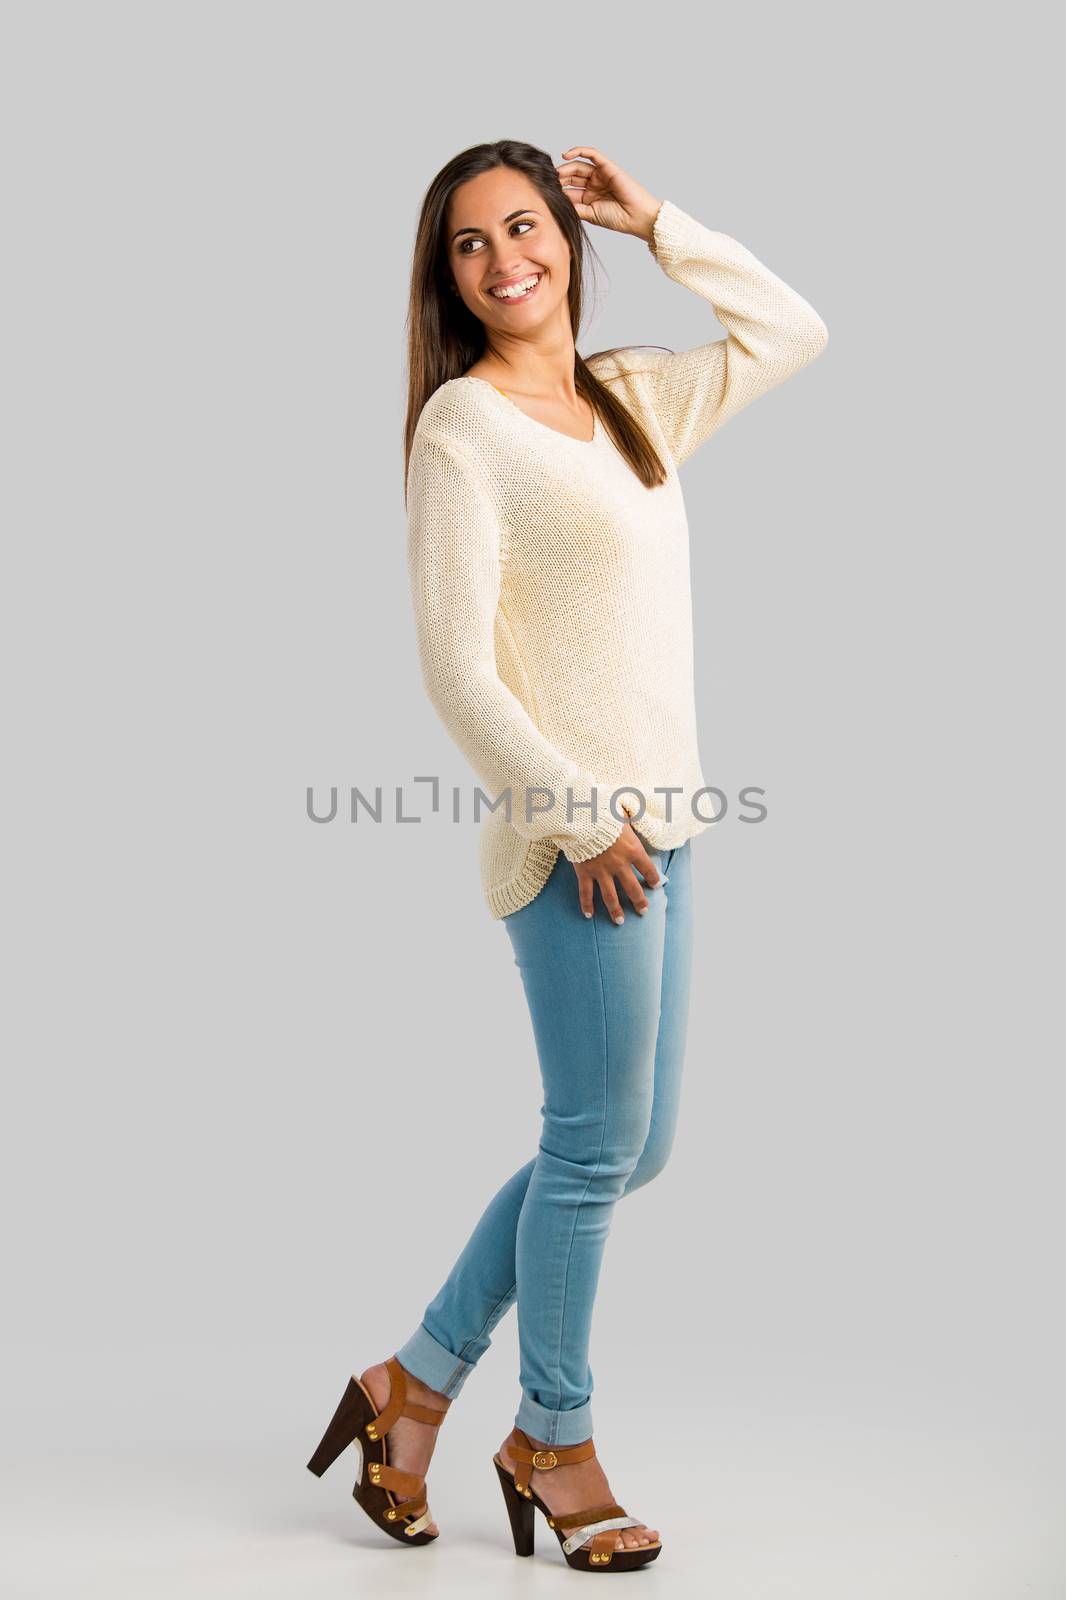 Full length studio shot of a young woman smiling